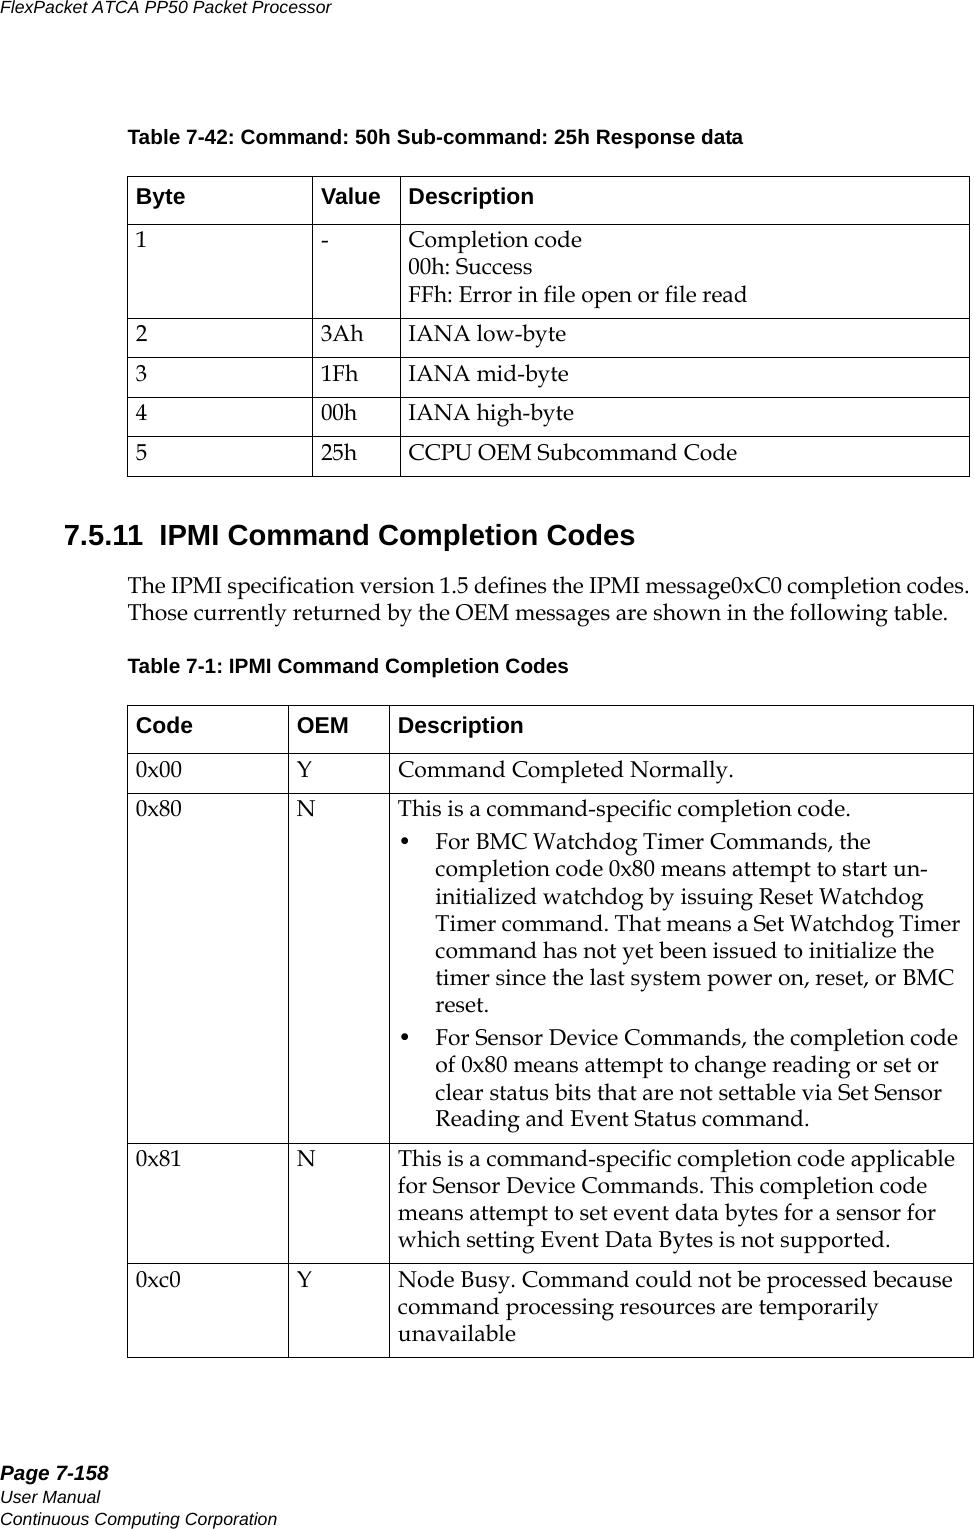 Page 7-158User ManualContinuous Computing CorporationFlexPacket ATCA PP50 Packet Processor     Preliminary7.5.11  IPMI Command Completion CodesThe IPMI specification version 1.5 defines the IPMI message0xC0 completion codes. Those currently returned by the OEM messages are shown in the following table.Table 7-42: Command: 50h Sub-command: 25h Response dataByte Value Description 1 - Completion code 00h: SuccessFFh: Error in file open or file read2 3Ah IANA low-byte 3 1Fh IANA mid-byte 4 00h IANA high-byte 5  25h  CCPU OEM Subcommand Code Table 7-1: IPMI Command Completion Codes Code OEM Description0x00 Y Command Completed Normally. 0x80 N This is a command-specific completion code.• For BMC Watchdog Timer Commands, the completion code 0x80 means attempt to start un-initialized watchdog by issuing Reset Watchdog Timer command. That means a Set Watchdog Timer command has not yet been issued to initialize the timer since the last system power on, reset, or BMC reset.• For Sensor Device Commands, the completion code of 0x80 means attempt to change reading or set or clear status bits that are not settable via Set Sensor Reading and Event Status command.0x81 N This is a command-specific completion code applicable for Sensor Device Commands. This completion code means attempt to set event data bytes for a sensor for which setting Event Data Bytes is not supported.0xc0 Y Node Busy. Command could not be processed because command processing resources are temporarily unavailable